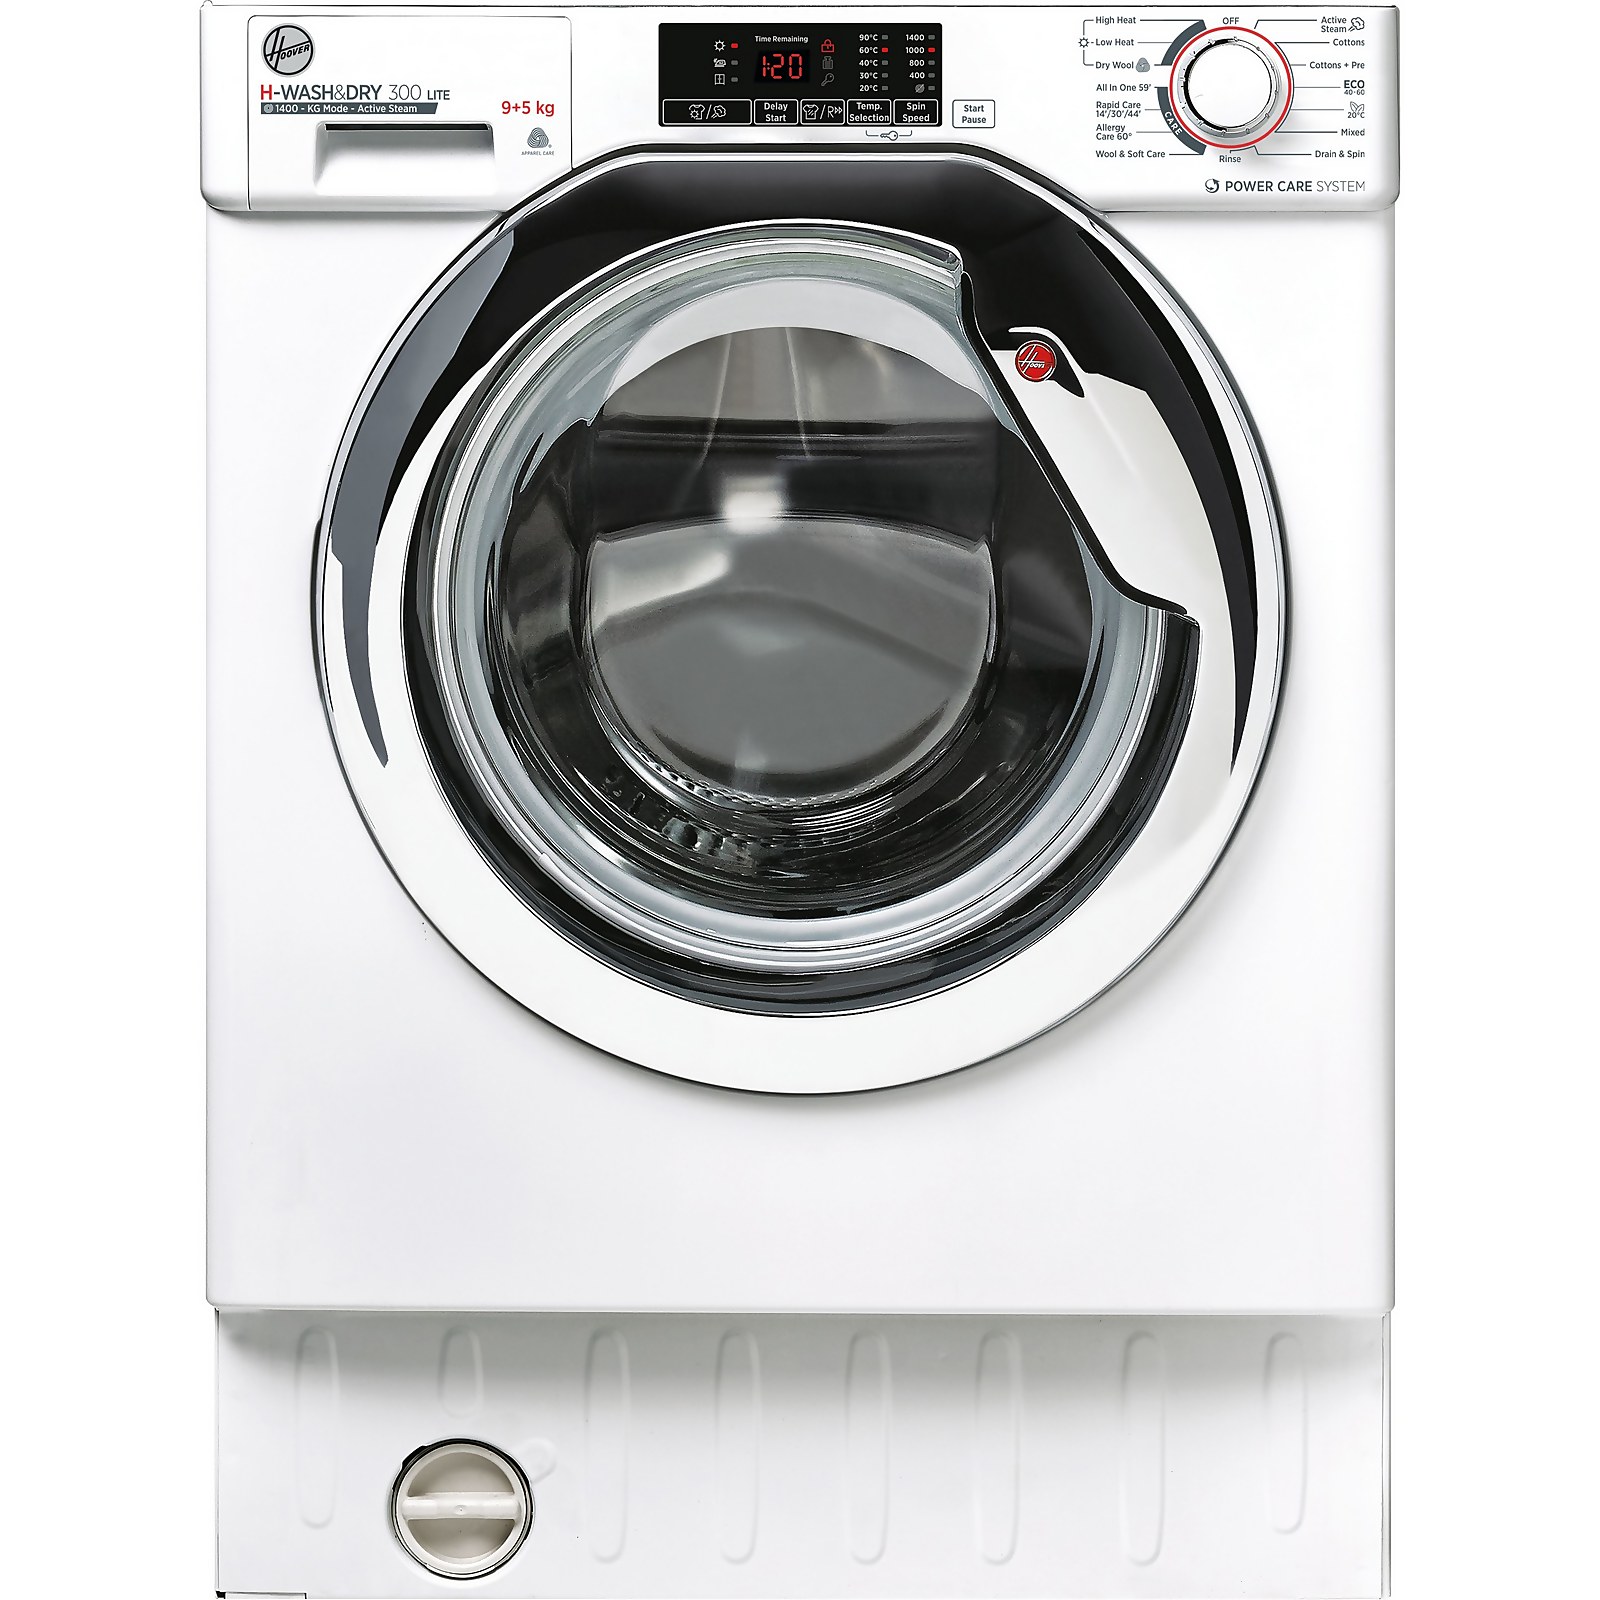 Hoover H-WASH&DRY 300 LITE HBDS495D1ACE Integrated 9Kg / 5Kg Washer Dryer with 1400 rpm - White